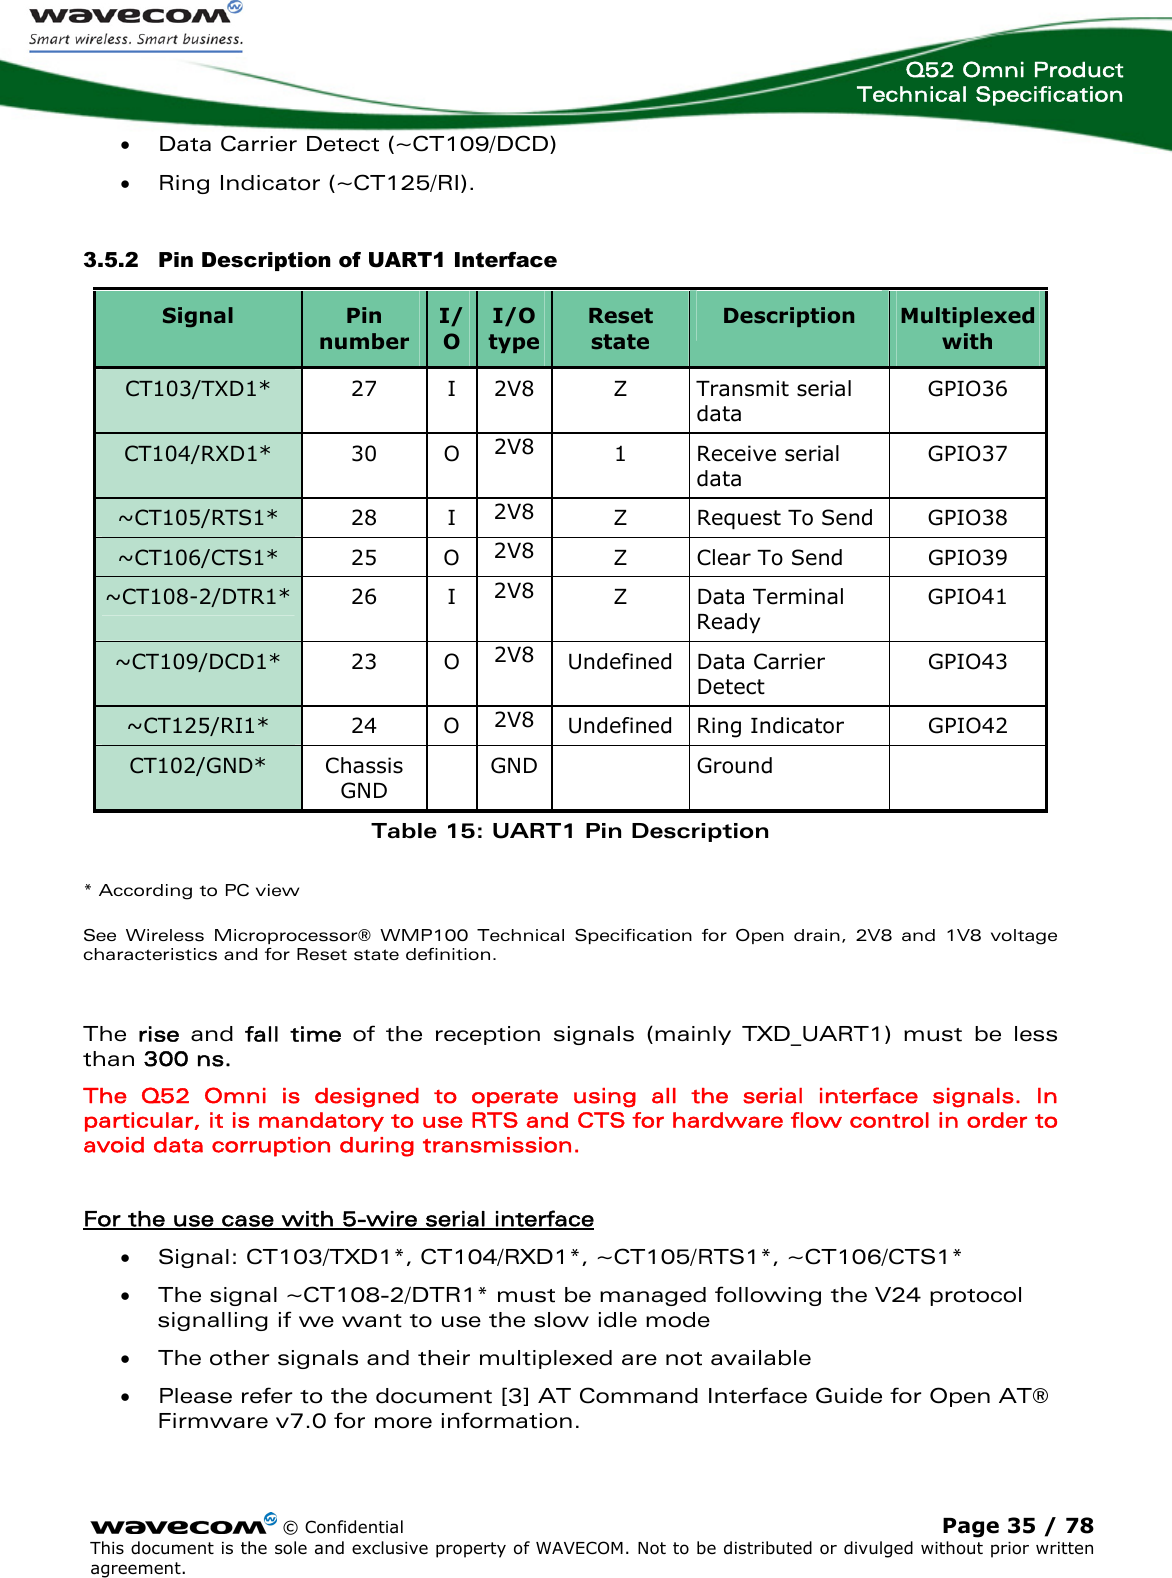  Q52 Omni Product Technical Specification    © Confidential Page 35 / 78 This document is the sole and exclusive property of WAVECOM. Not to be distributed or divulged without prior written agreement.  • Data Carrier Detect (~CT109/DCD) • Ring Indicator (~CT125/RI). 3.5.2 Pin Description of UART1 Interface Table 15: UART1 Pin Description * According to PC view See  Wireless Microprocessor® WMP100 Technical Specification for Open drain, 2V8 and 1V8 voltage characteristics and for Reset state definition.  The  rise  and  fall time of the reception signals (mainly TXD_UART1) must be less than 300 ns. The Q52 Omni is designed to operate using all the serial interface signals. In particular, it is mandatory to use RTS and CTS for hardware flow control in order to avoid data corruption during transmission.  For the use case with 5-wire serial interface  • Signal: CT103/TXD1*, CT104/RXD1*, ~CT105/RTS1*, ~CT106/CTS1* • The signal ~CT108-2/DTR1* must be managed following the V24 protocol signalling if we want to use the slow idle mode  • The other signals and their multiplexed are not available • Please refer to the document [3] AT Command Interface Guide for Open AT® Firmware v7.0 for more information.  Signal  Pin number I/O I/O type Reset state Description  Multiplexed with CT103/TXD1* 27 I 2V8 Z Transmit serial data GPIO36 CT104/RXD1* 30 O 2V8  1 Receive serial data GPIO37 ~CT105/RTS1* 28 I 2V8  Z Request To Send GPIO38 ~CT106/CTS1* 25 O 2V8  Z  Clear To Send  GPIO39 ~CT108-2/DTR1* 26  I 2V8  Z Data Terminal Ready GPIO41 ~CT109/DCD1* 23 O 2V8  Undefined Data Carrier Detect GPIO43 ~CT125/RI1* 24 O 2V8  Undefined Ring Indicator  GPIO42 CT102/GND* Chassis GND  GND  Ground   